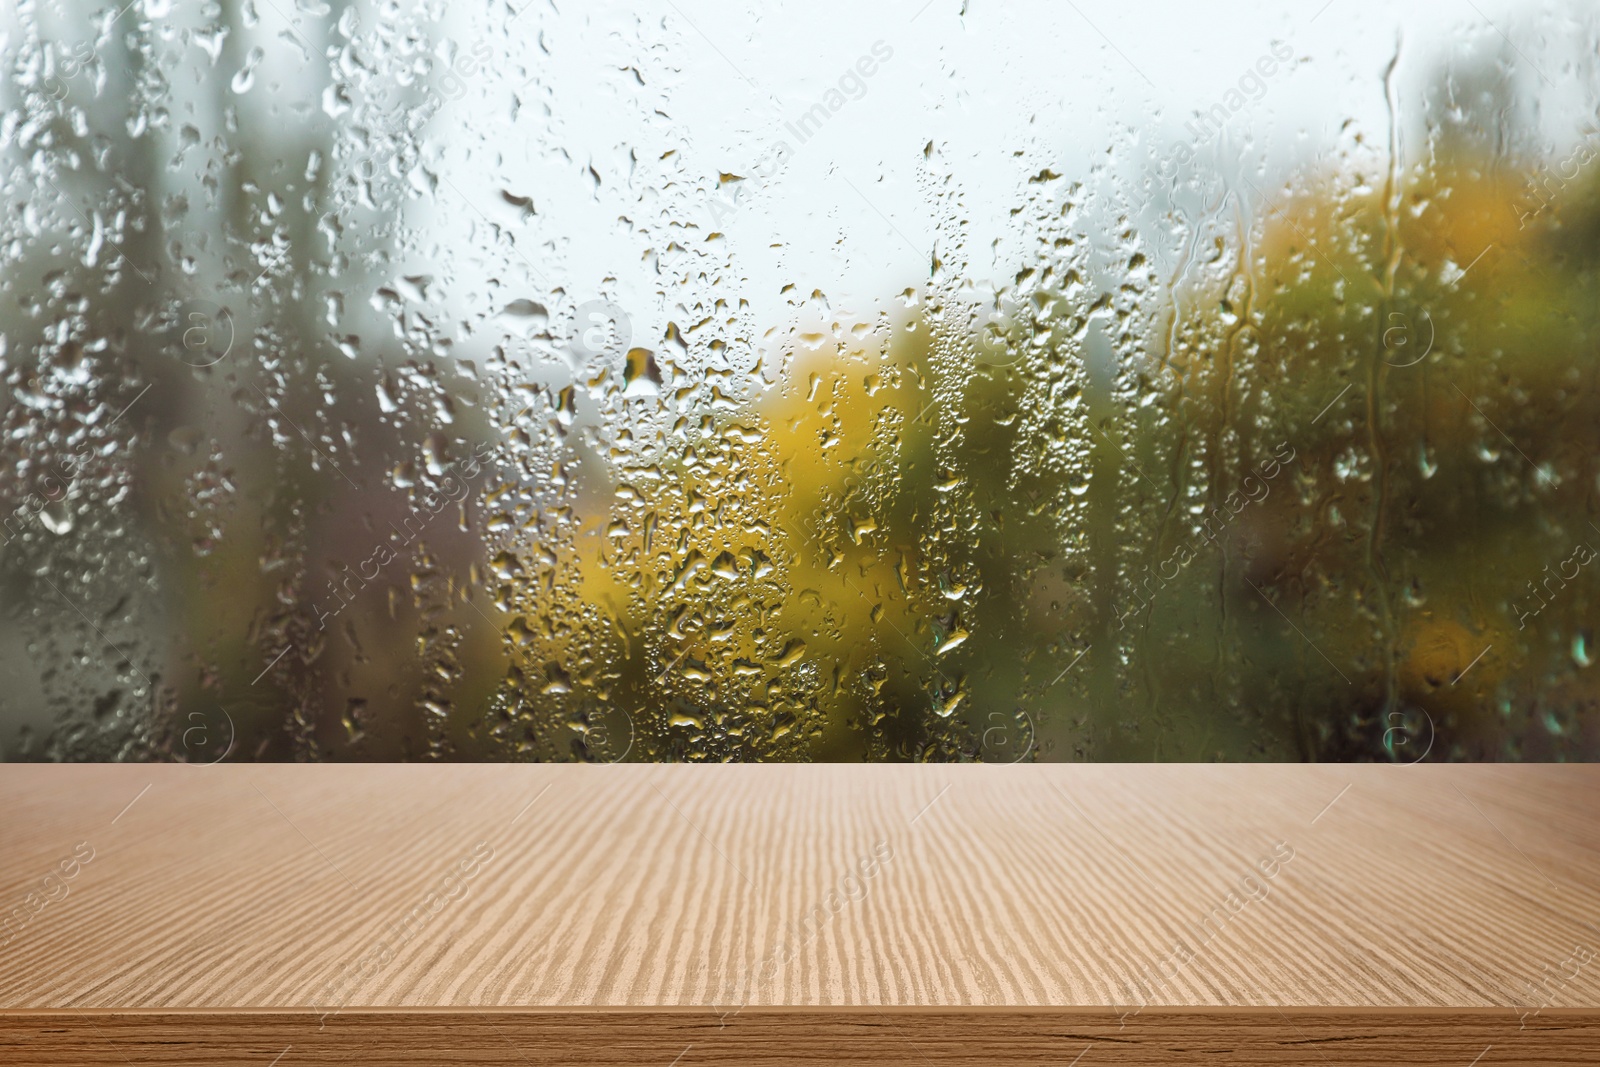 Image of Wooden table near window on rainy day